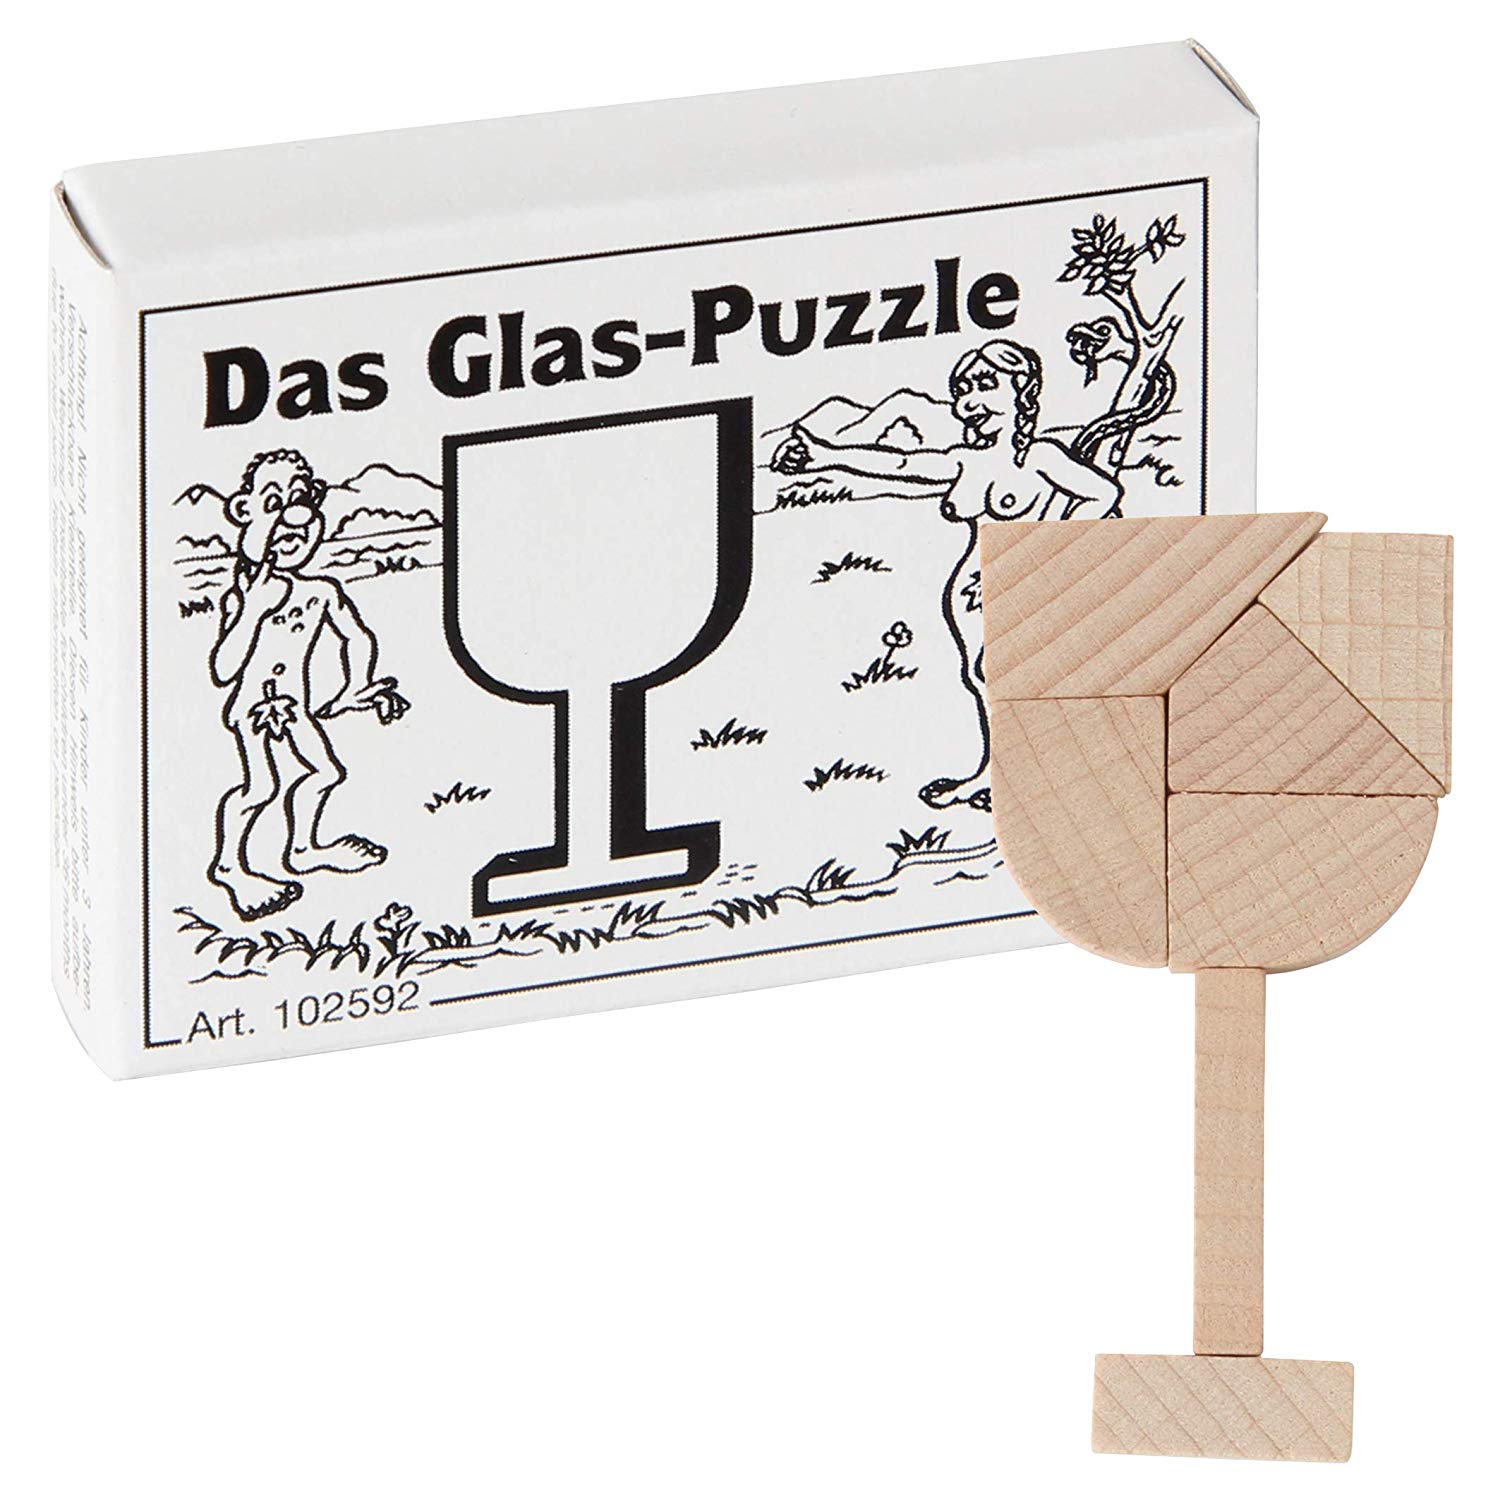 The Puzzle Of The Glass 12